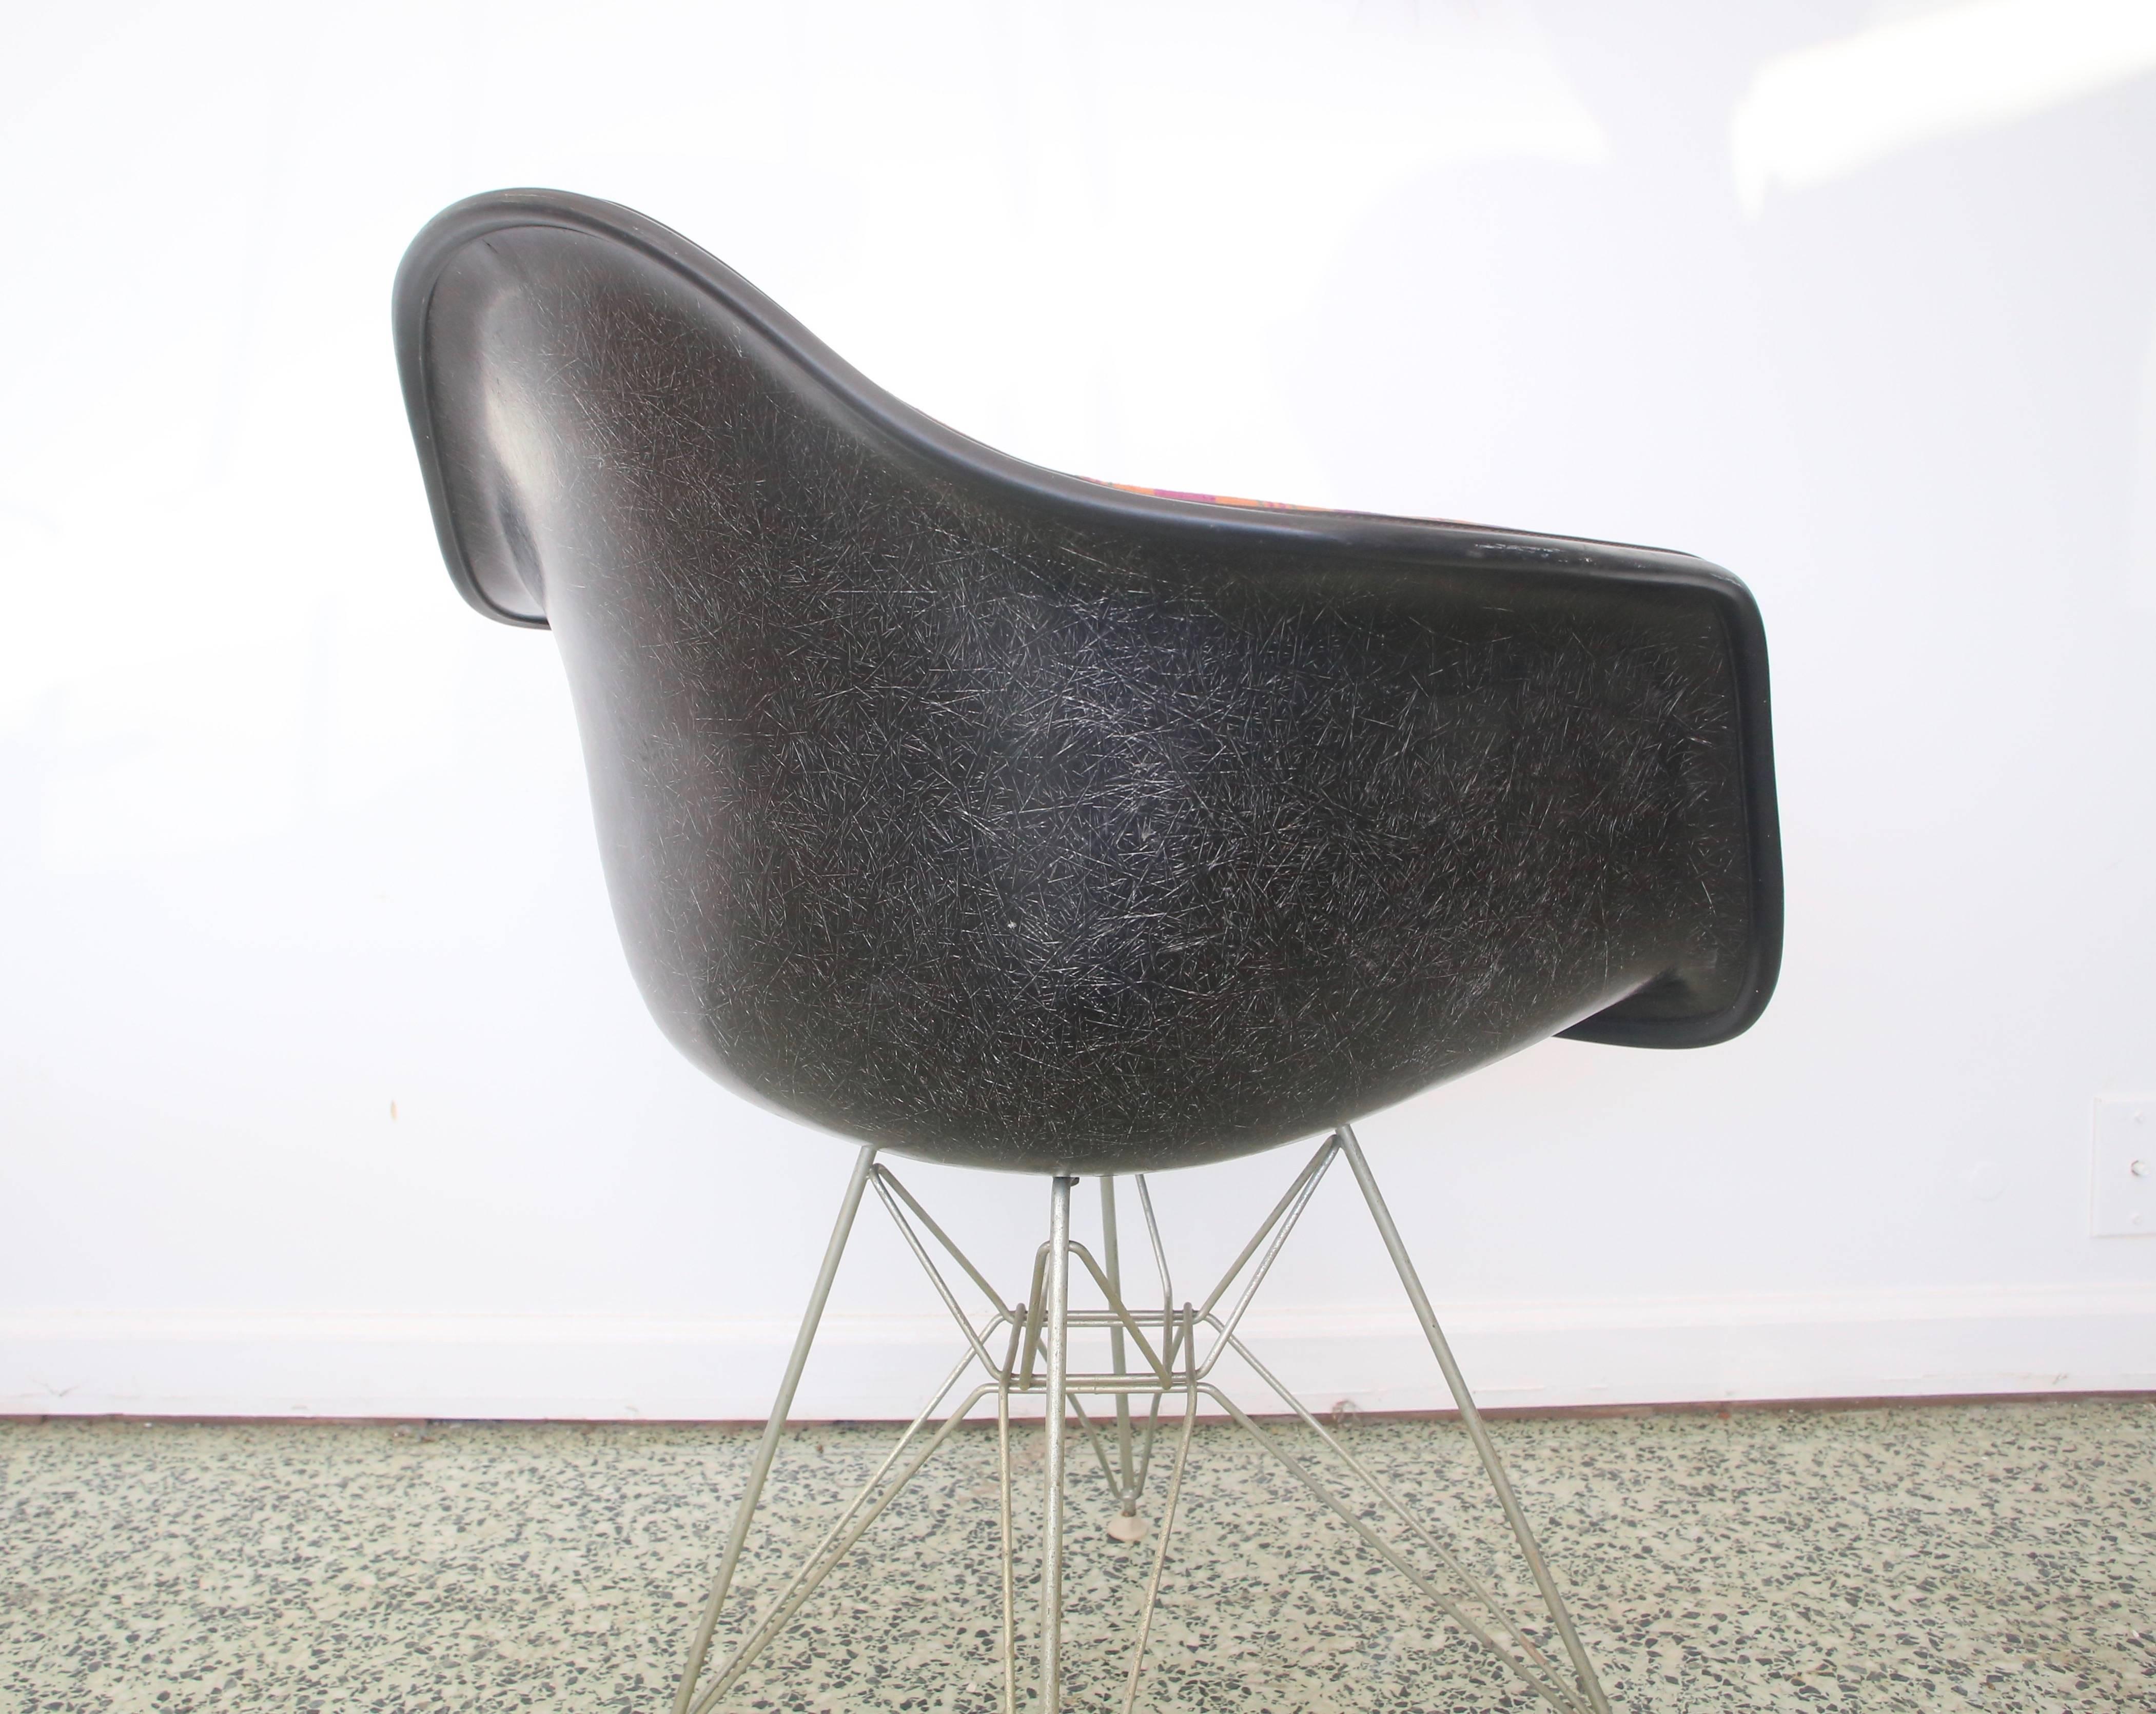 Designer: Charles Eames.
Manufacturer: Herman Miller. 
Period/Style: Mid-Century Modern. 
Country: United States.
 Date: 1960s.